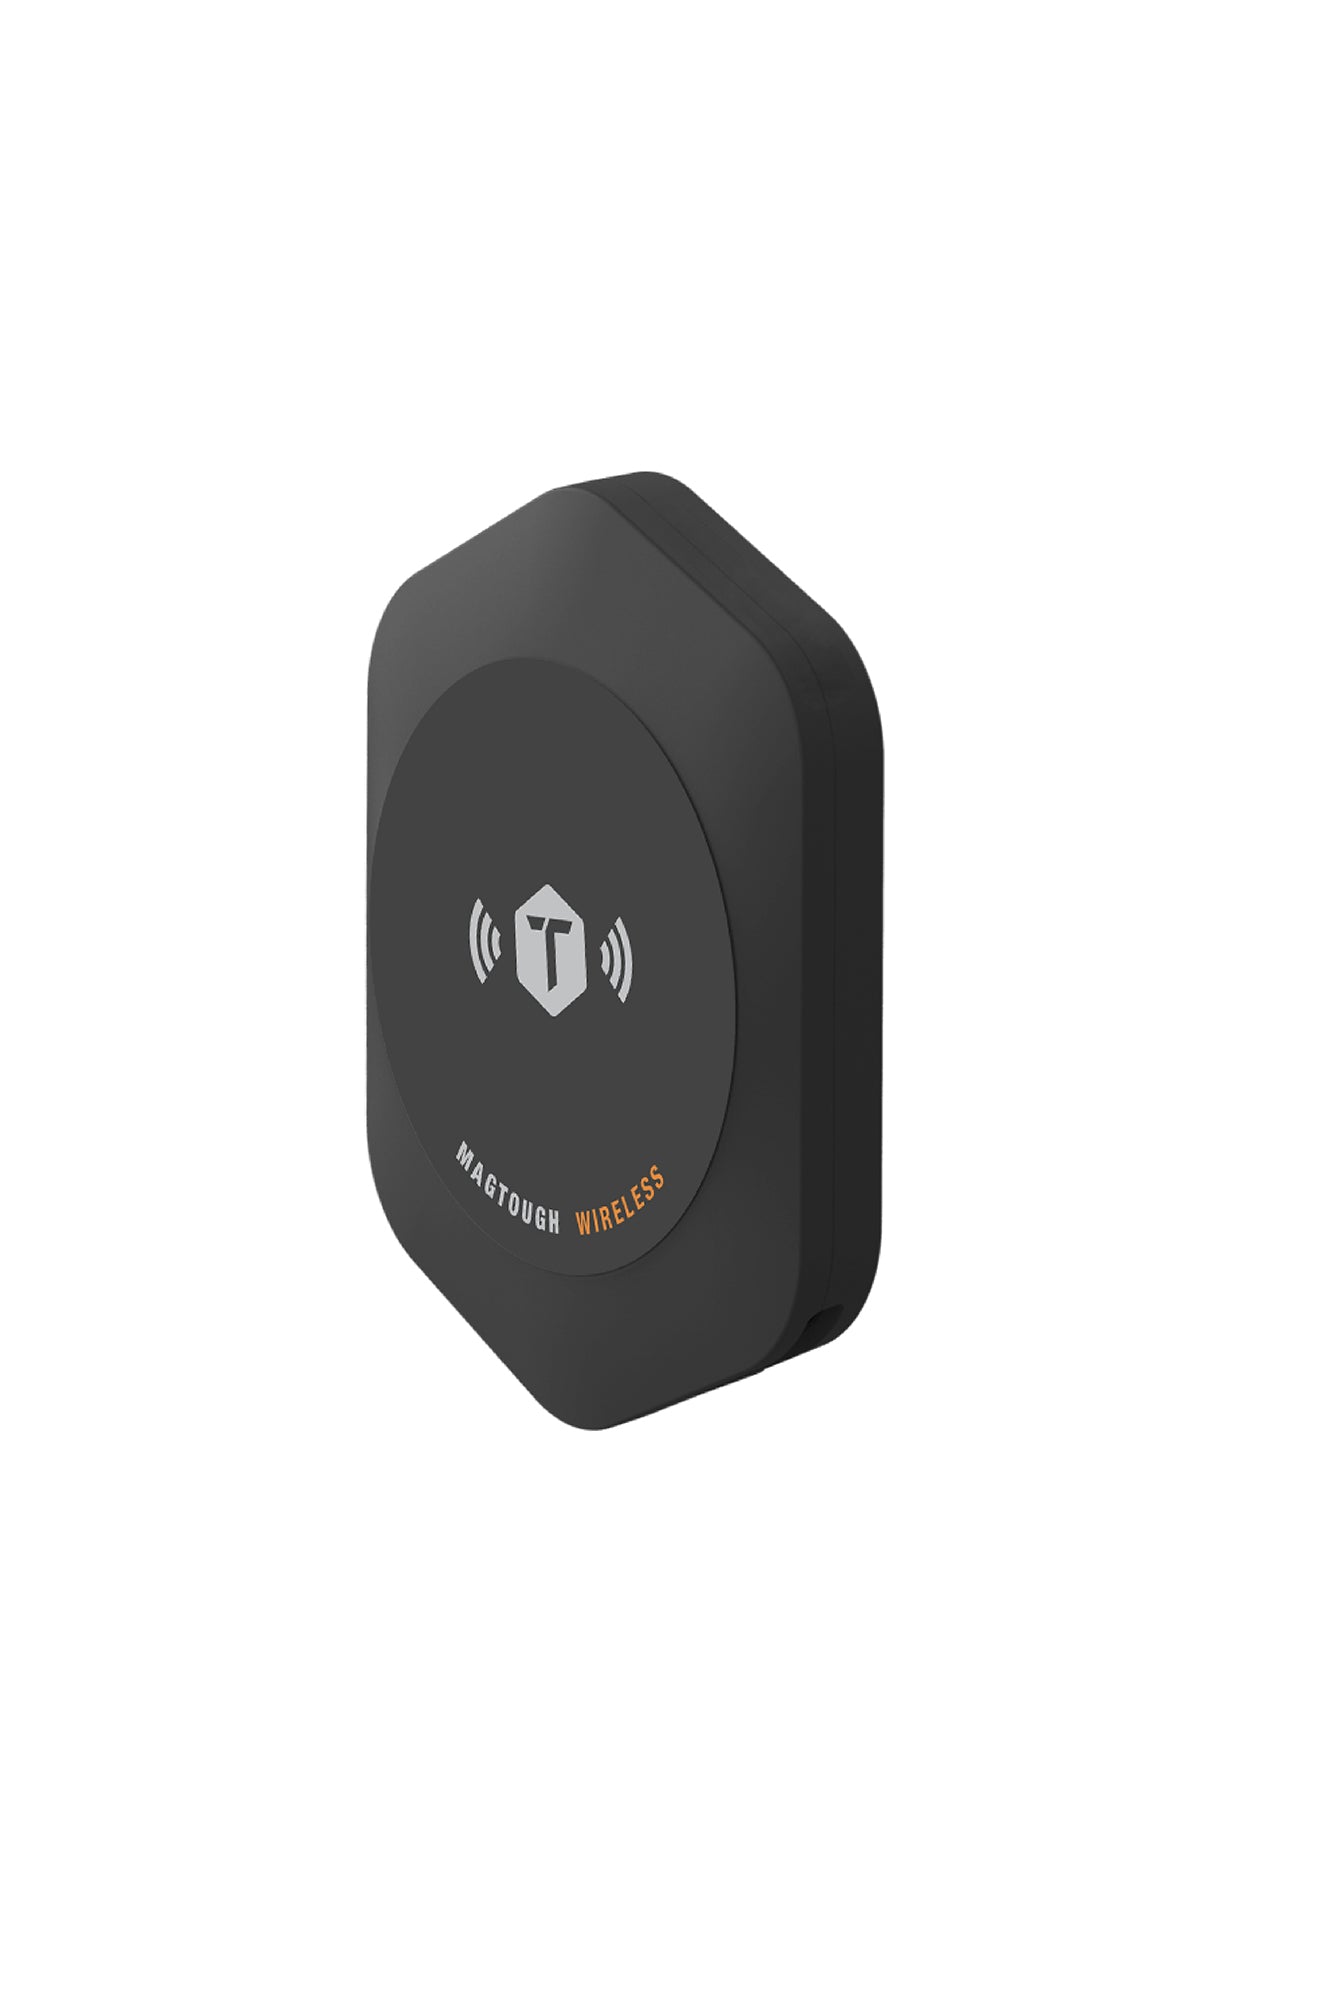 MagTough 15w Wireless Charging Magnetic Dock